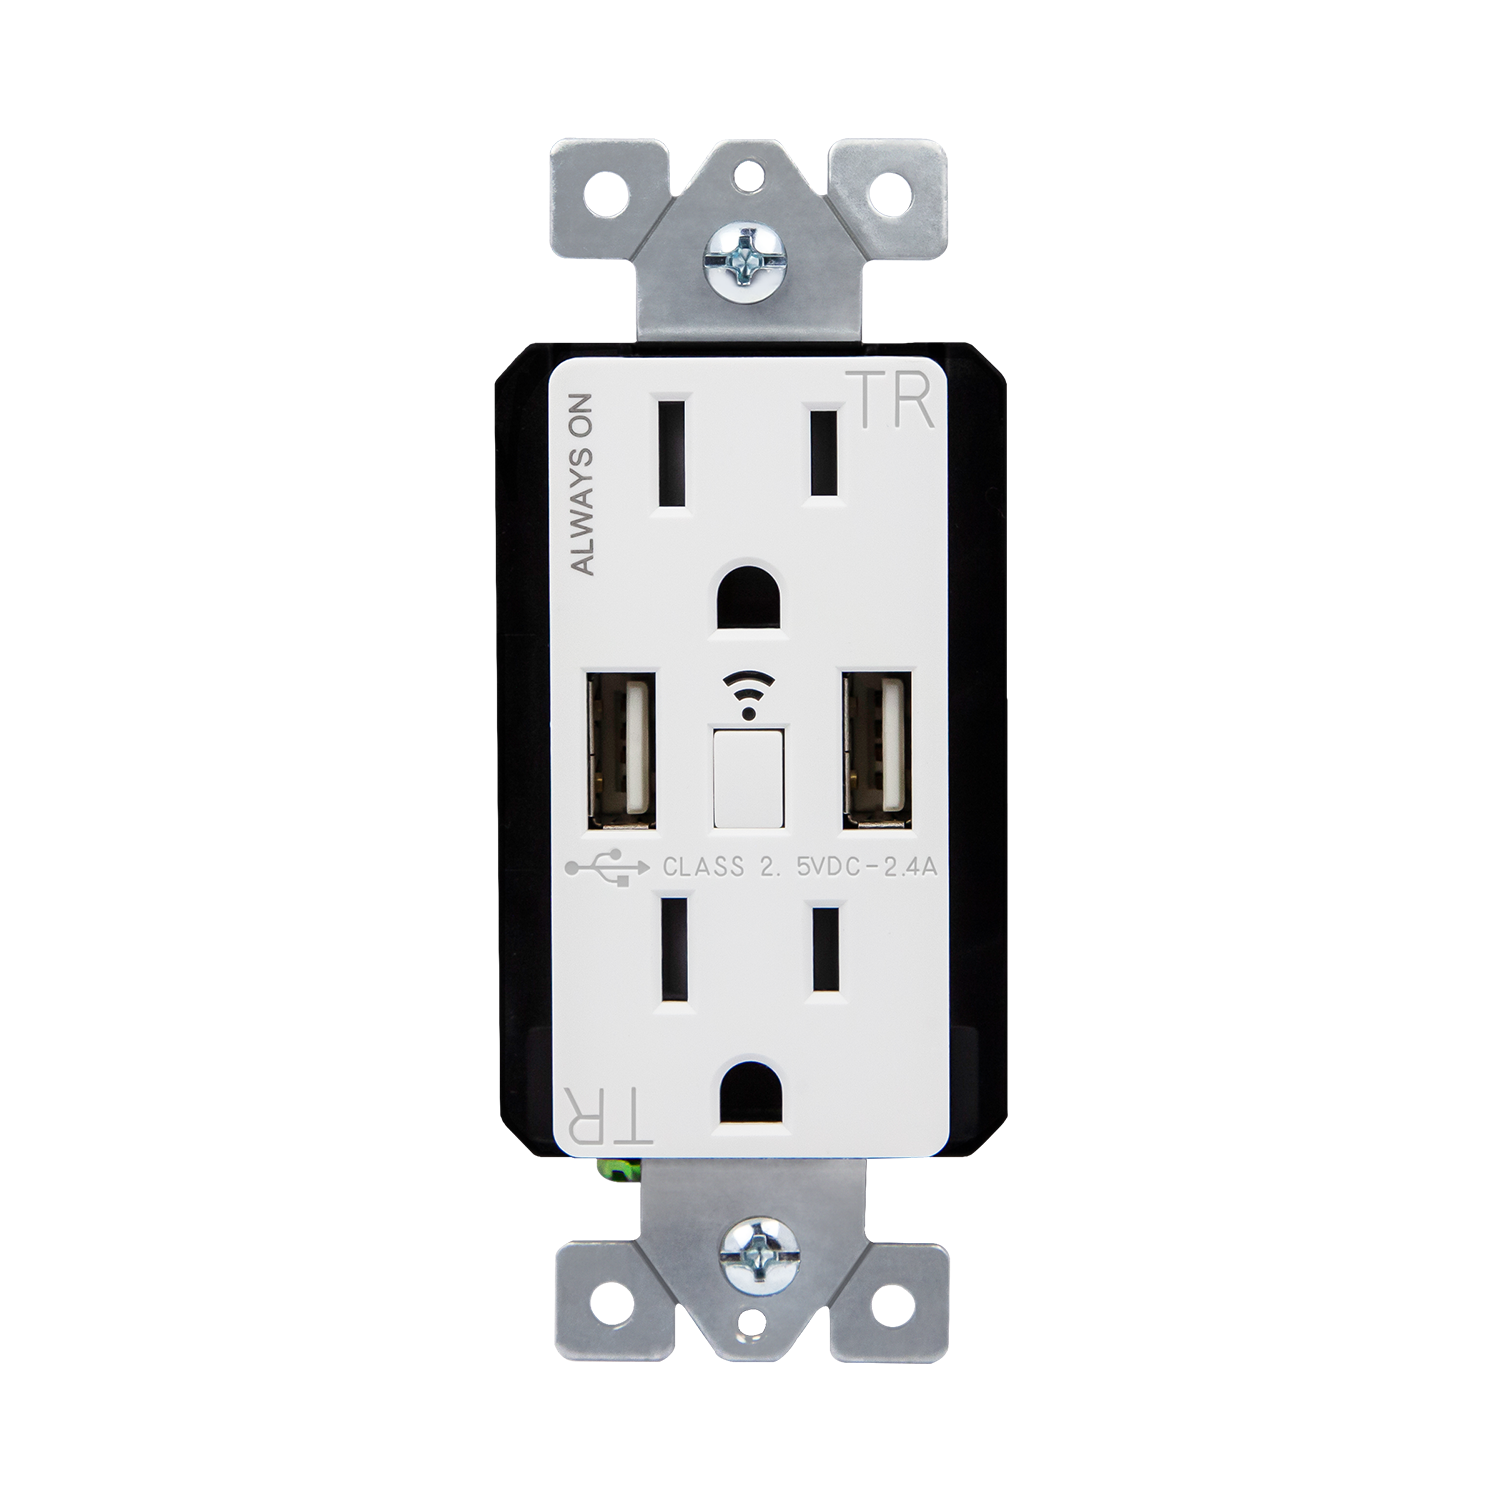 Smart Wi-Fi In-Wall Tamper Resistant Dual USB Charger Outlet Energy Monitoring